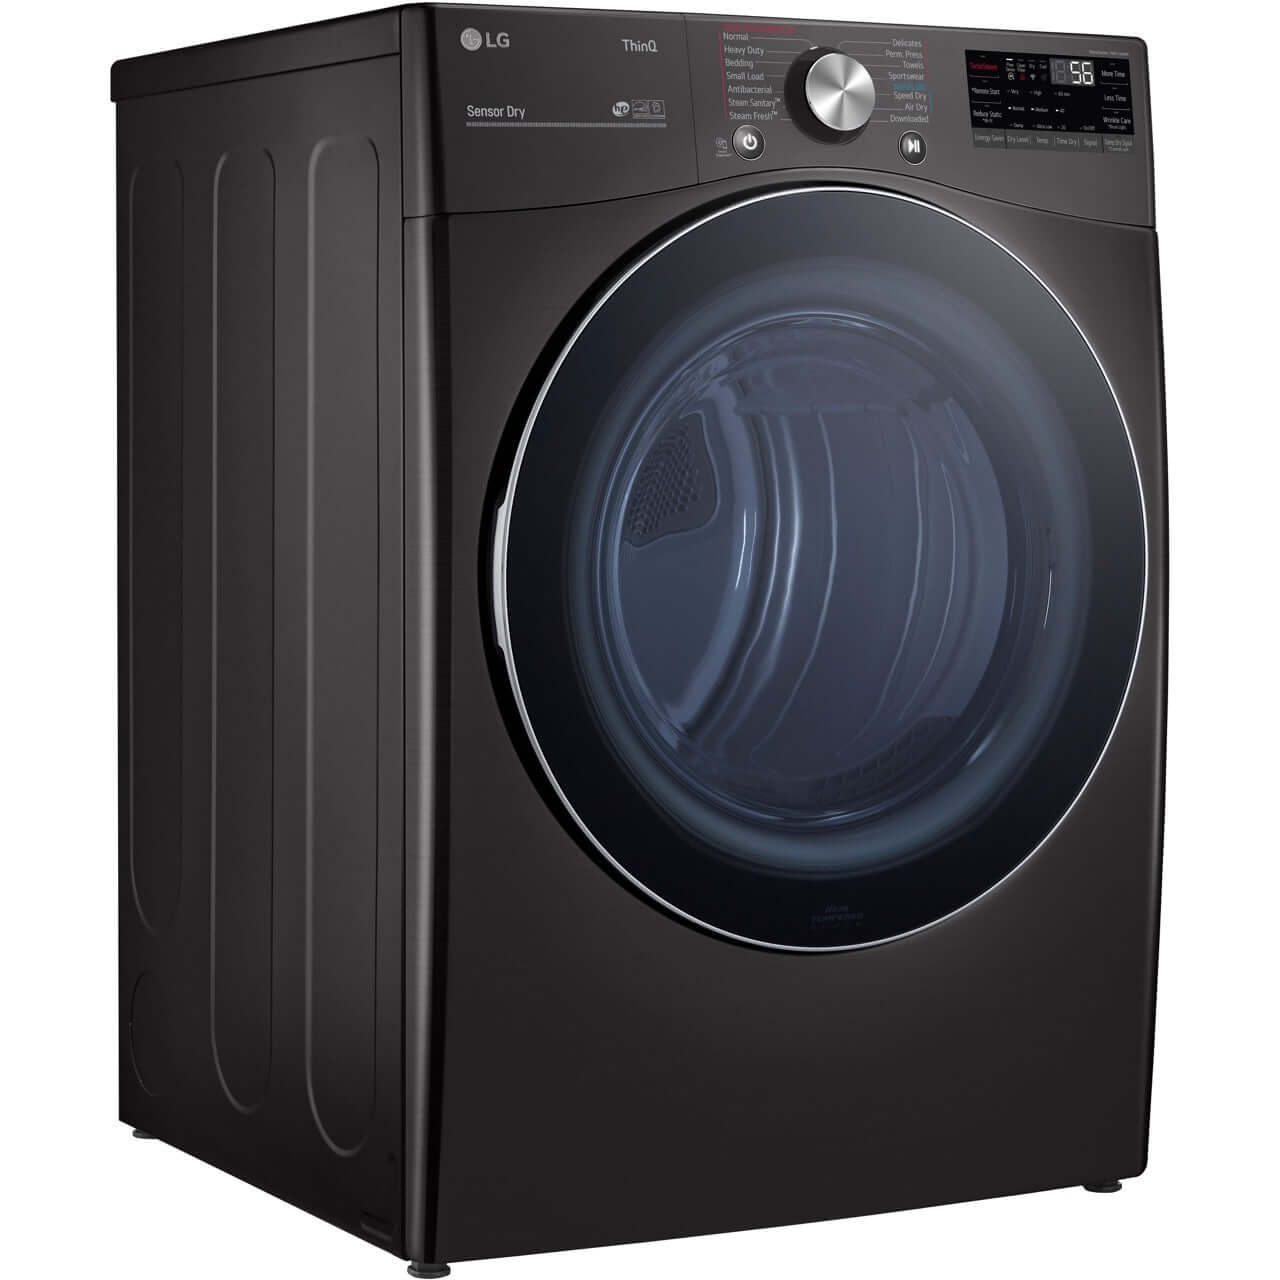 LG 27 In. 7.4-Cu. Ft. Front Load Gas Dryer with TurboSteam and Built-In Intelligence in Black Steel (DLGX4201B)